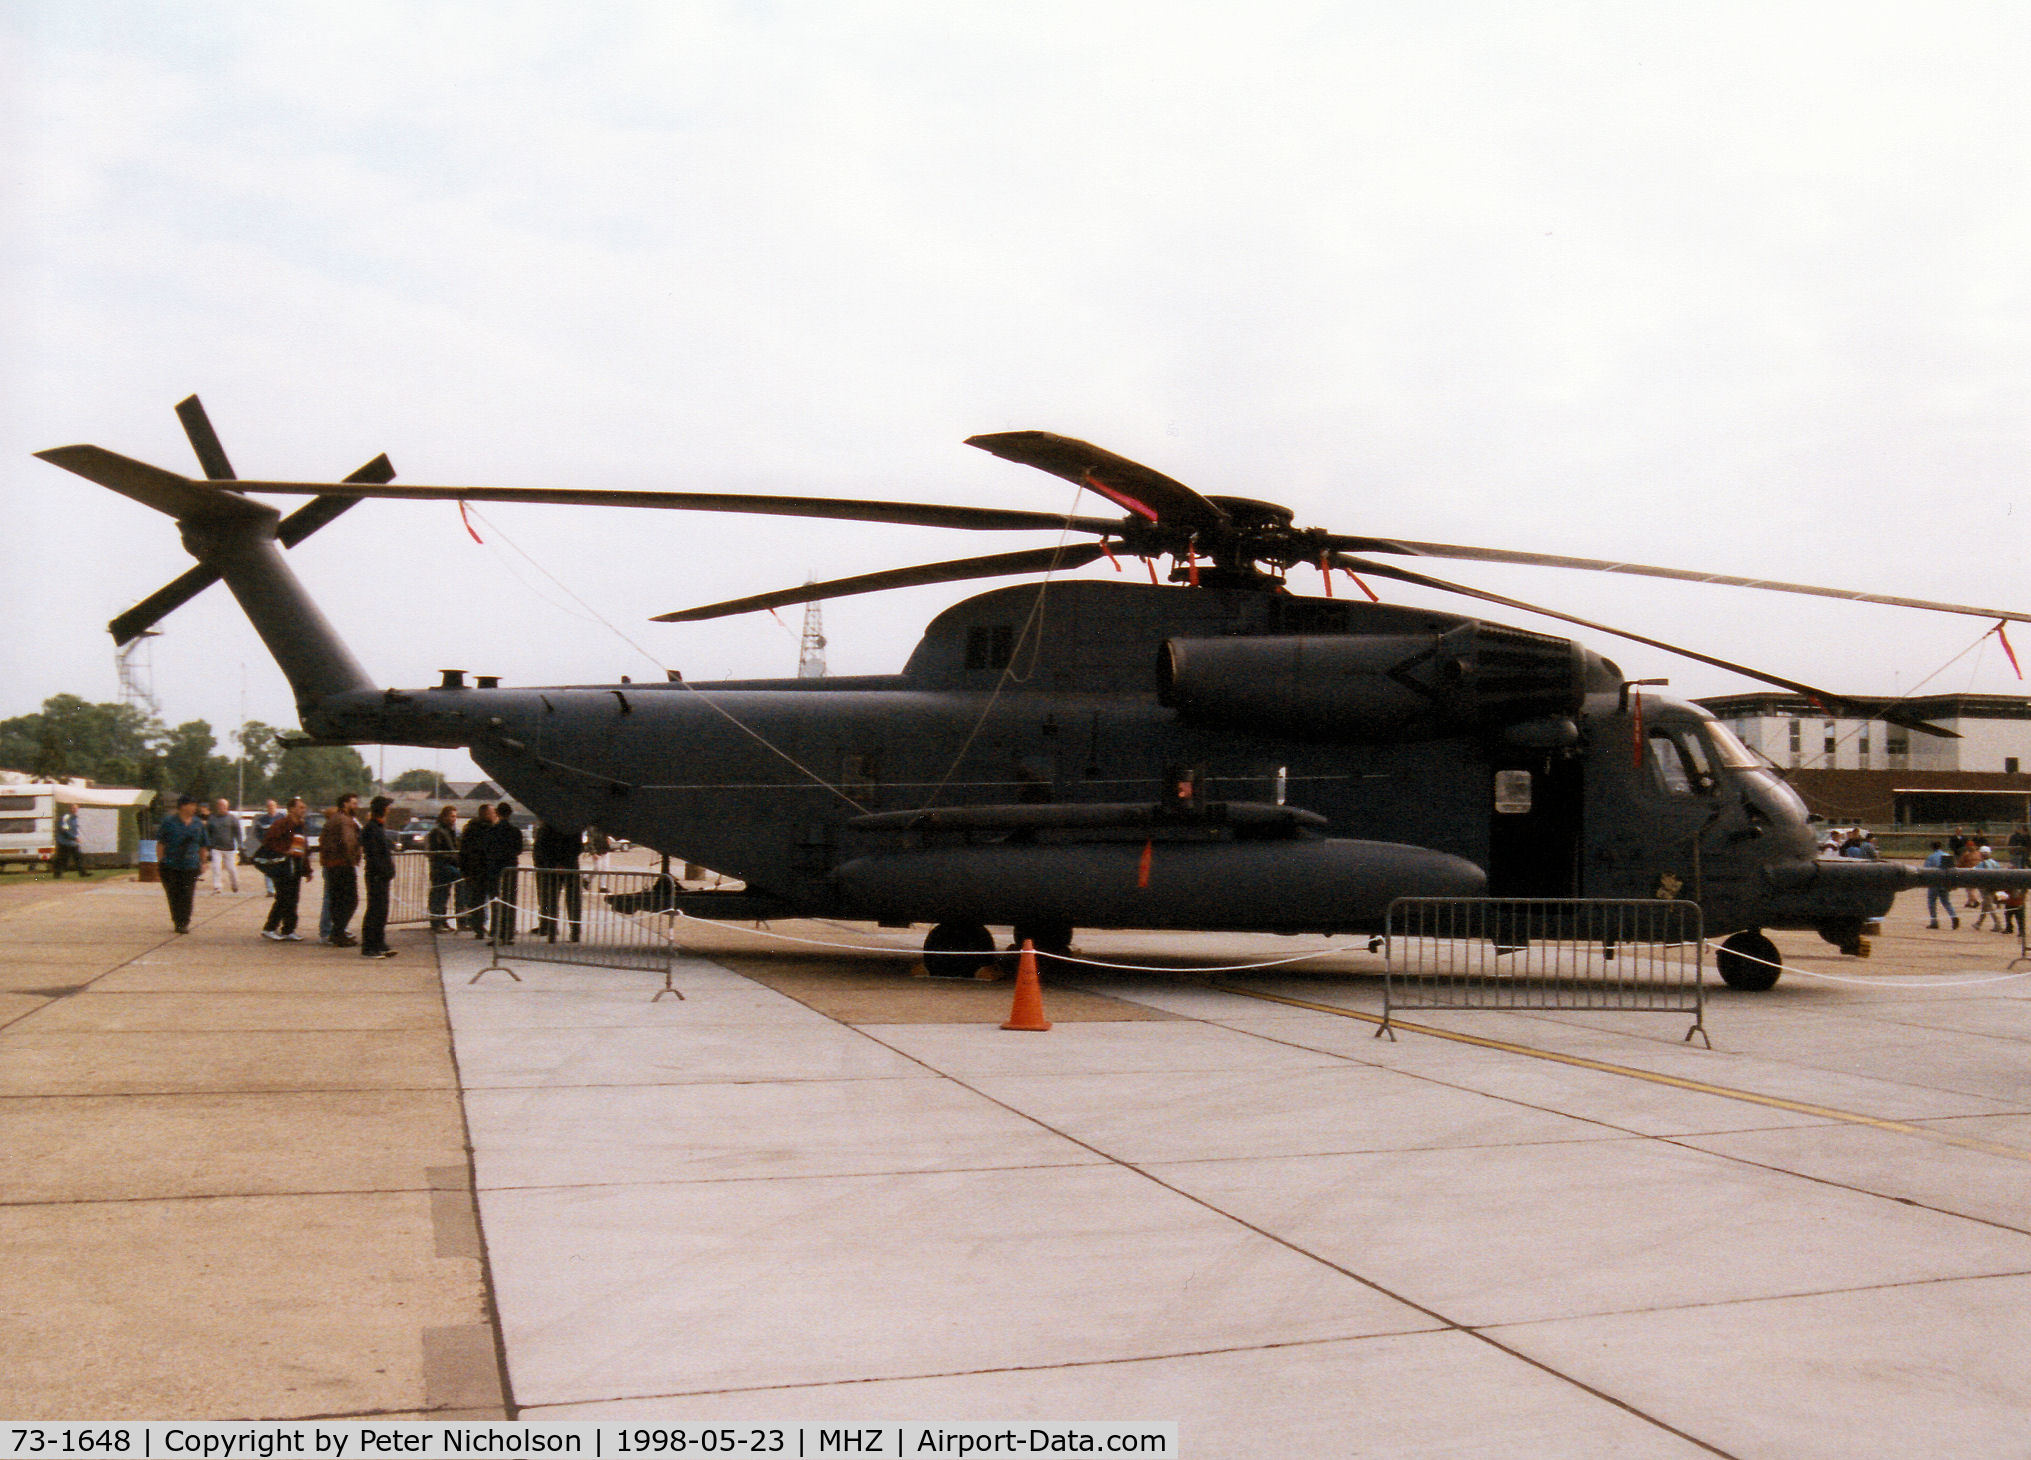 73-1648, 1973 Sikorsky MH-53J Pave Low III C/N 65-386, Pave Low III MH-53J of 21st Special Operations Squadron of the 352nd Special Operations Group on display at the 1998 RAF Mildenhall Air Fete.